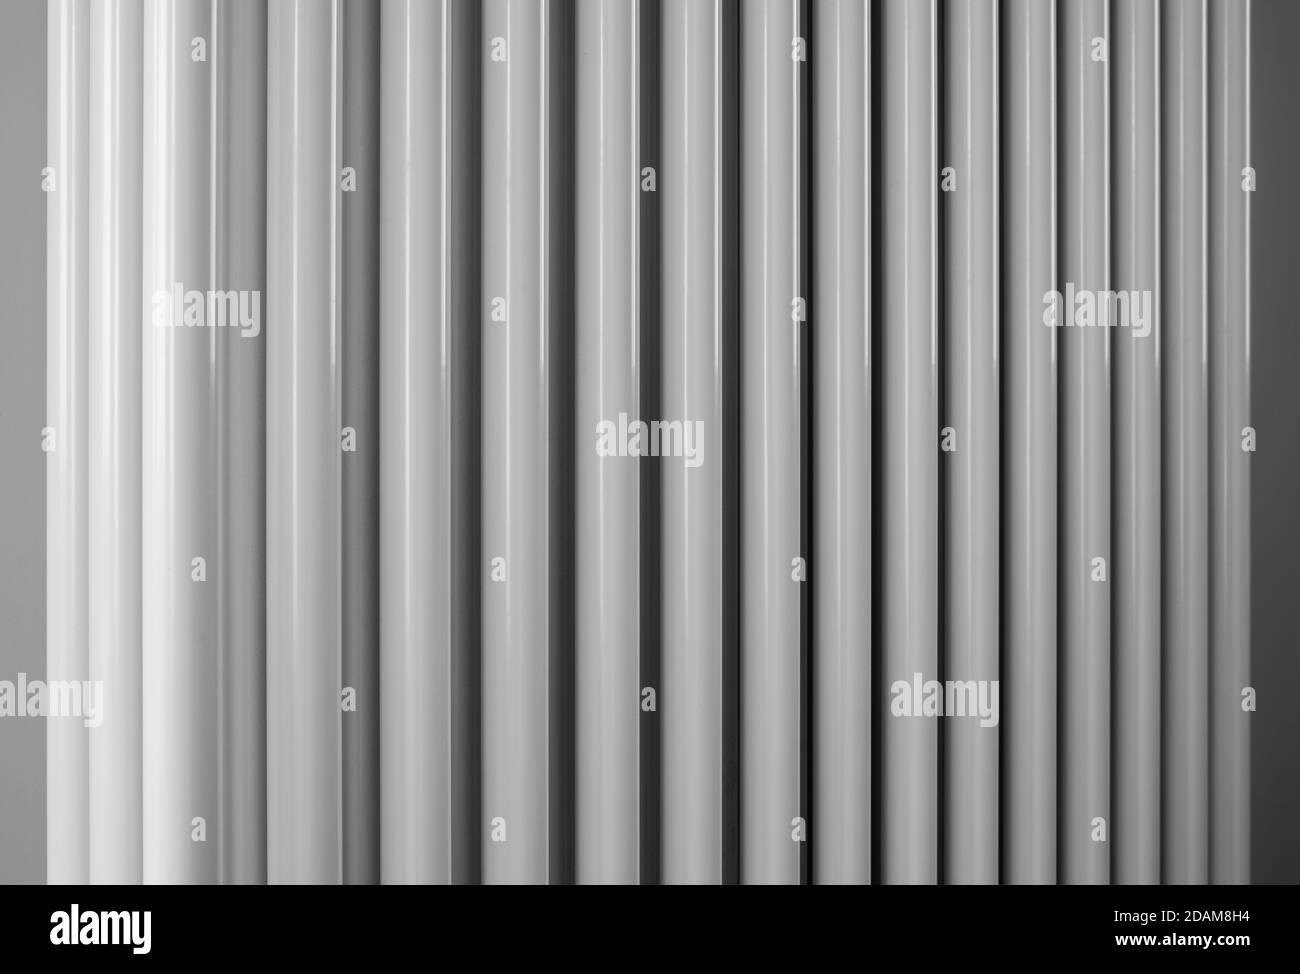 Black and white abstract image of a radiator pipes. Perspective Stock Photo